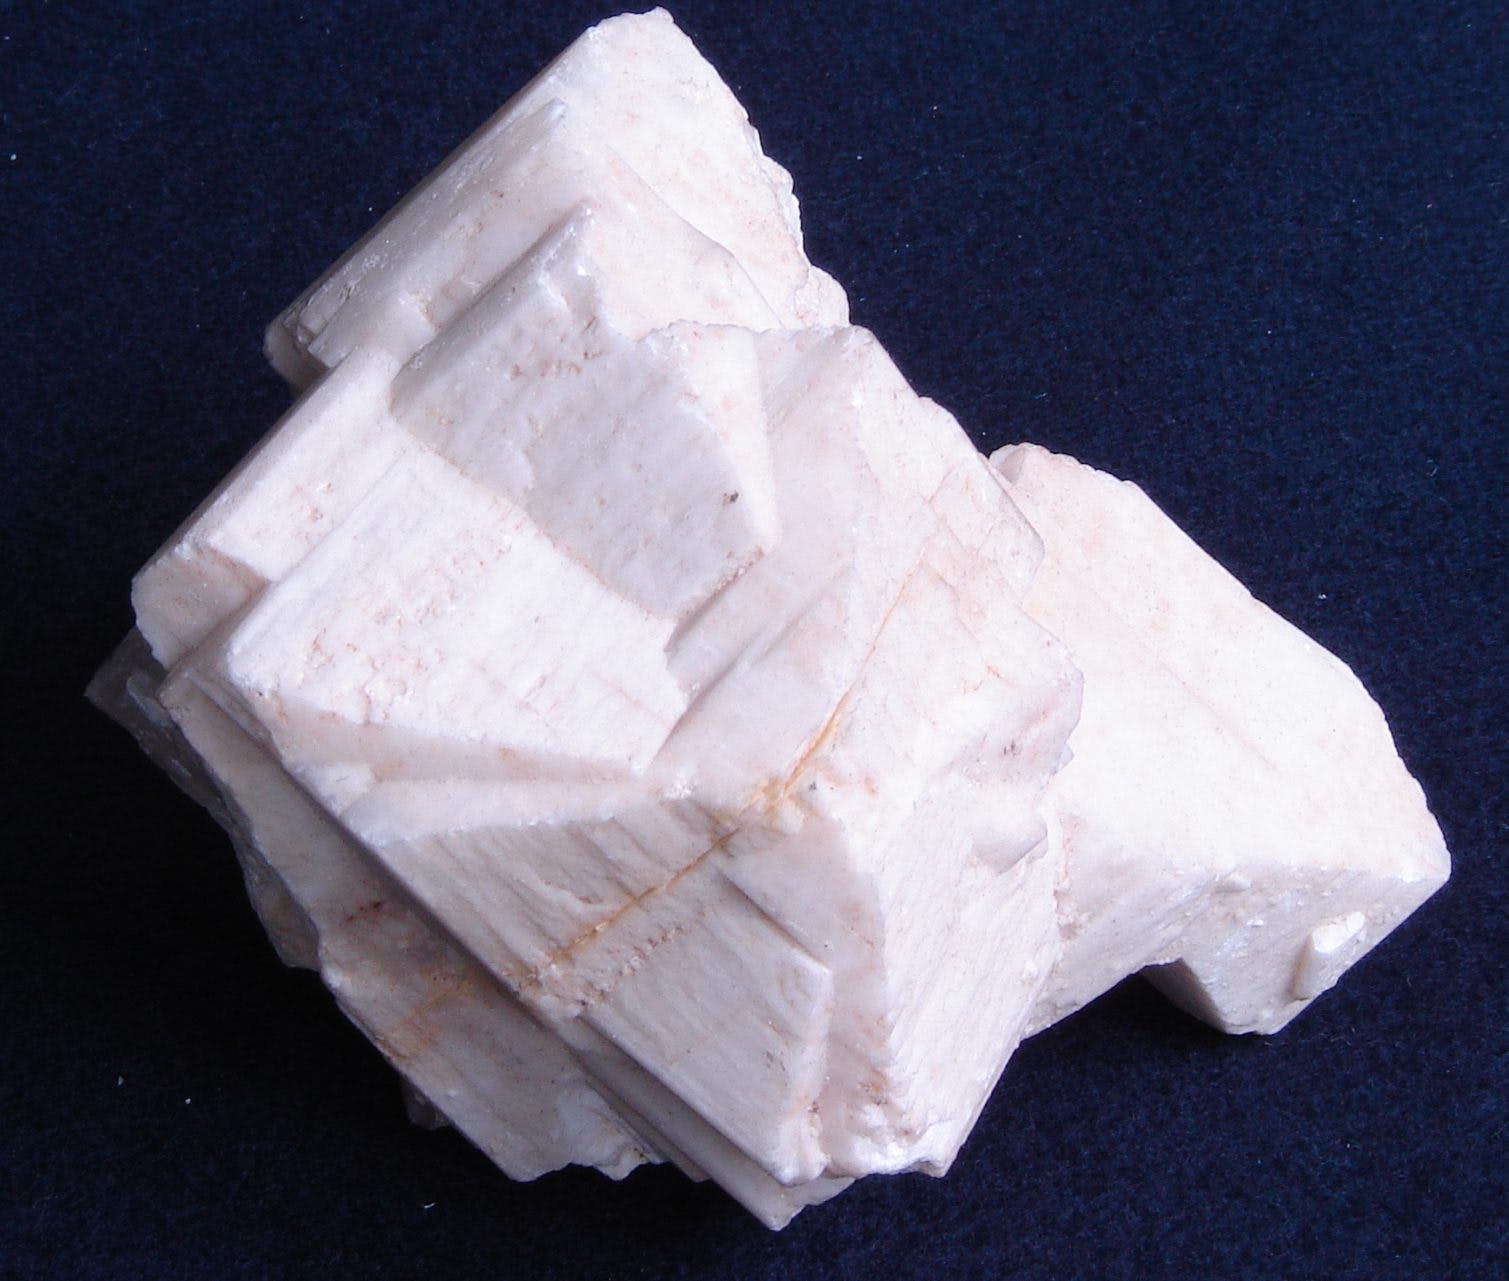 A cluster of microcline twinned crystals